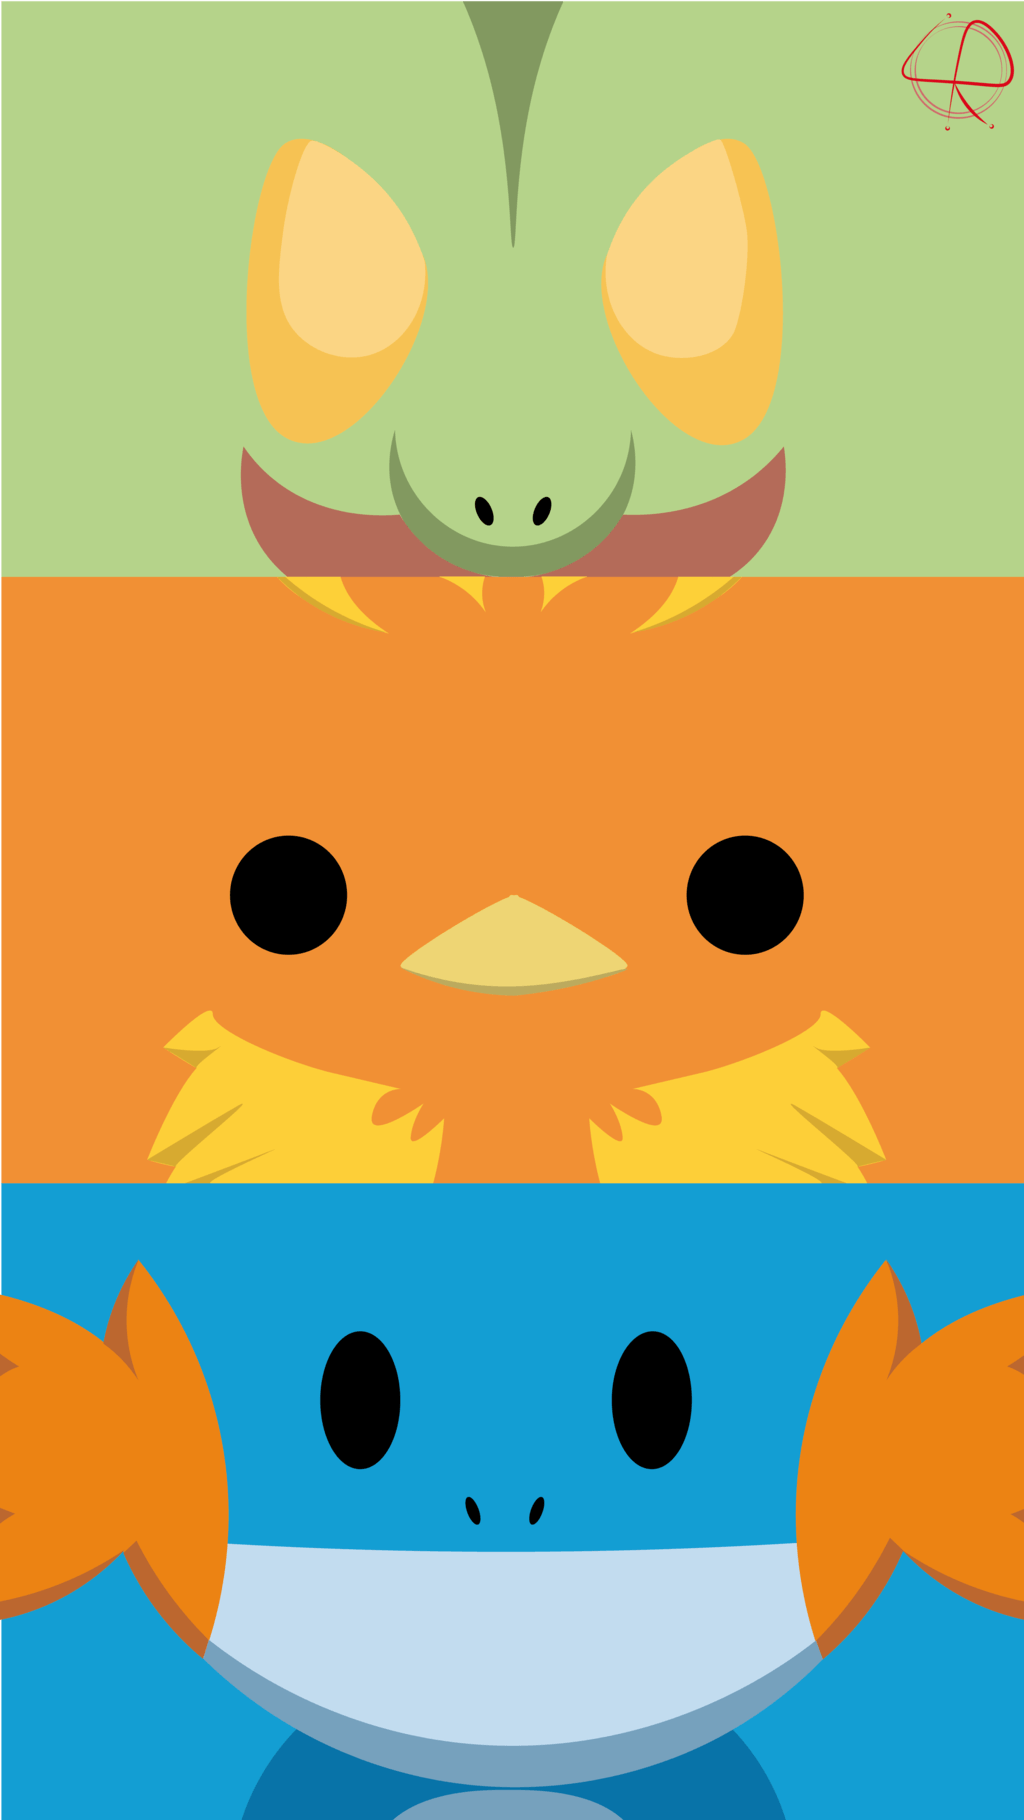 Catch 'em All On Your Mobile Screen! Experience The Vibrant World Of Pokemon With This Hq Background, Featuring Favorites Like Pikachu And Charizard Against A Starlit Backdrop.